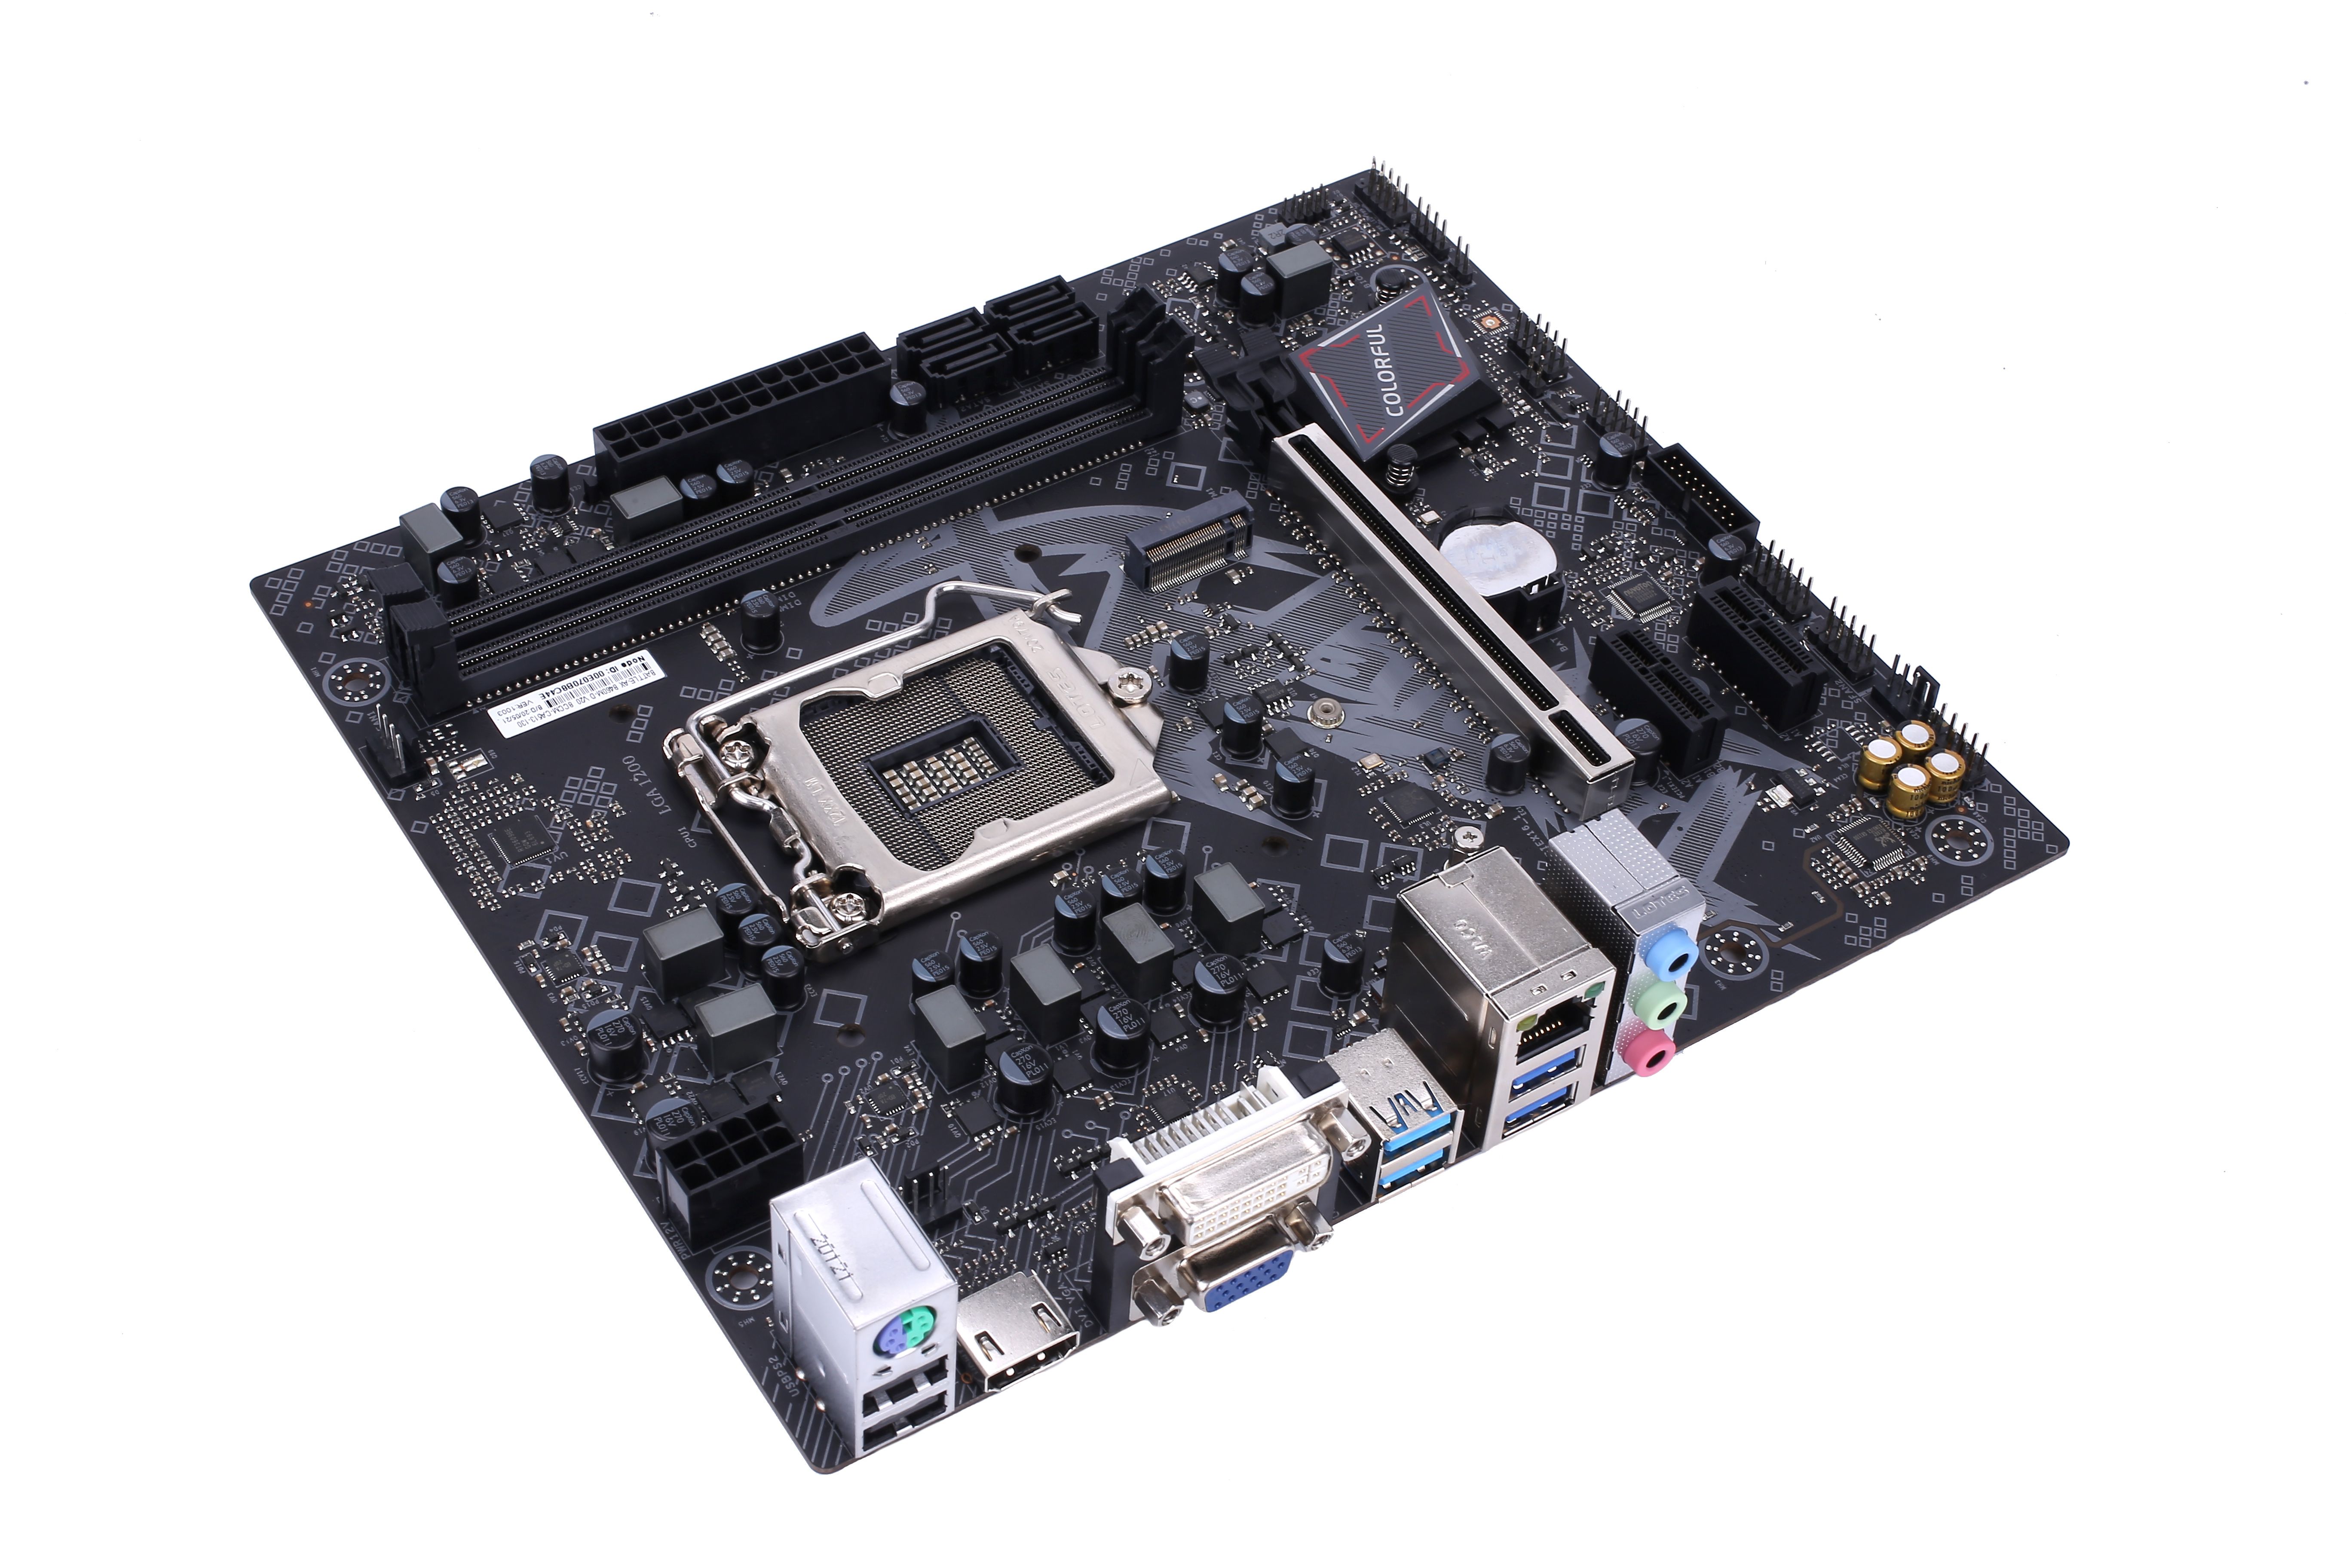 Colorful-BATTLE-AX-B460M-D-V20-Computer-Motherboard-PC-Desktop-Motherboard-Supports-10th-Generation--1710084